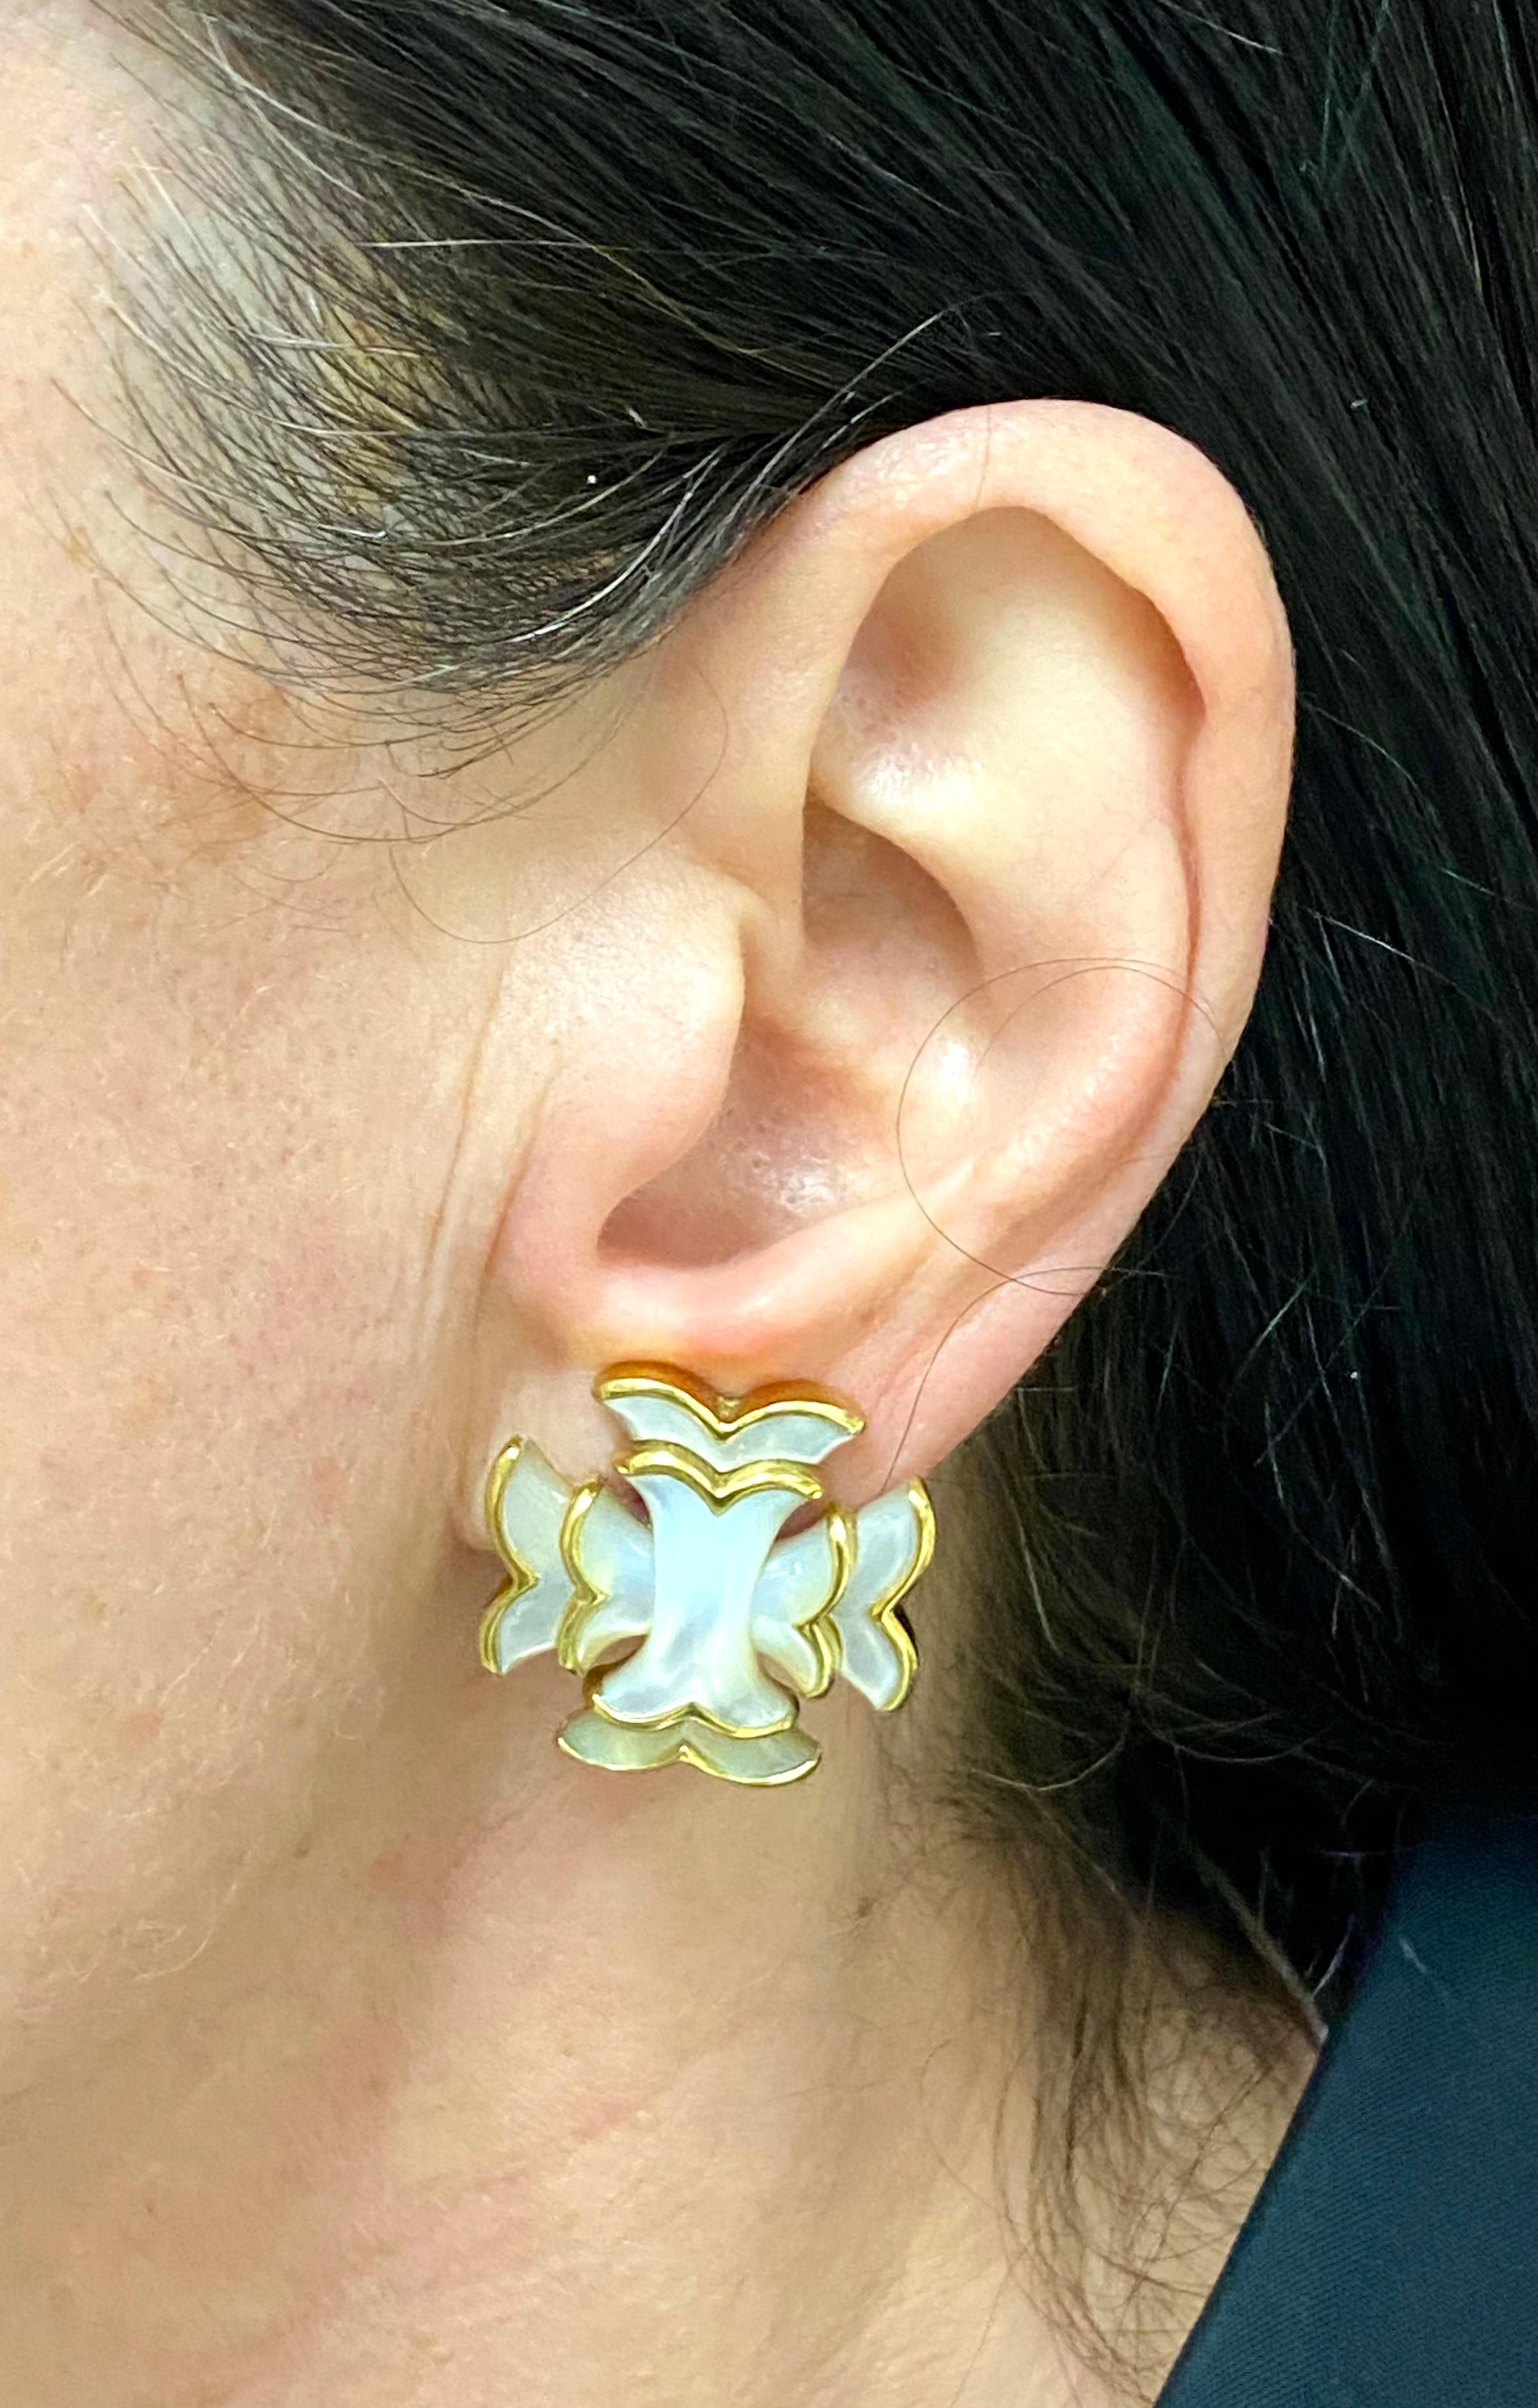 A pair of vintage Angela Cummings earrings made of 18k gold with mother of pearl inlay.
	The earrings designed as whimsical Maltese crosses. The mother of pearl inlay is staged in two layers divided by the gold curves. 
Mother of pearl makes these